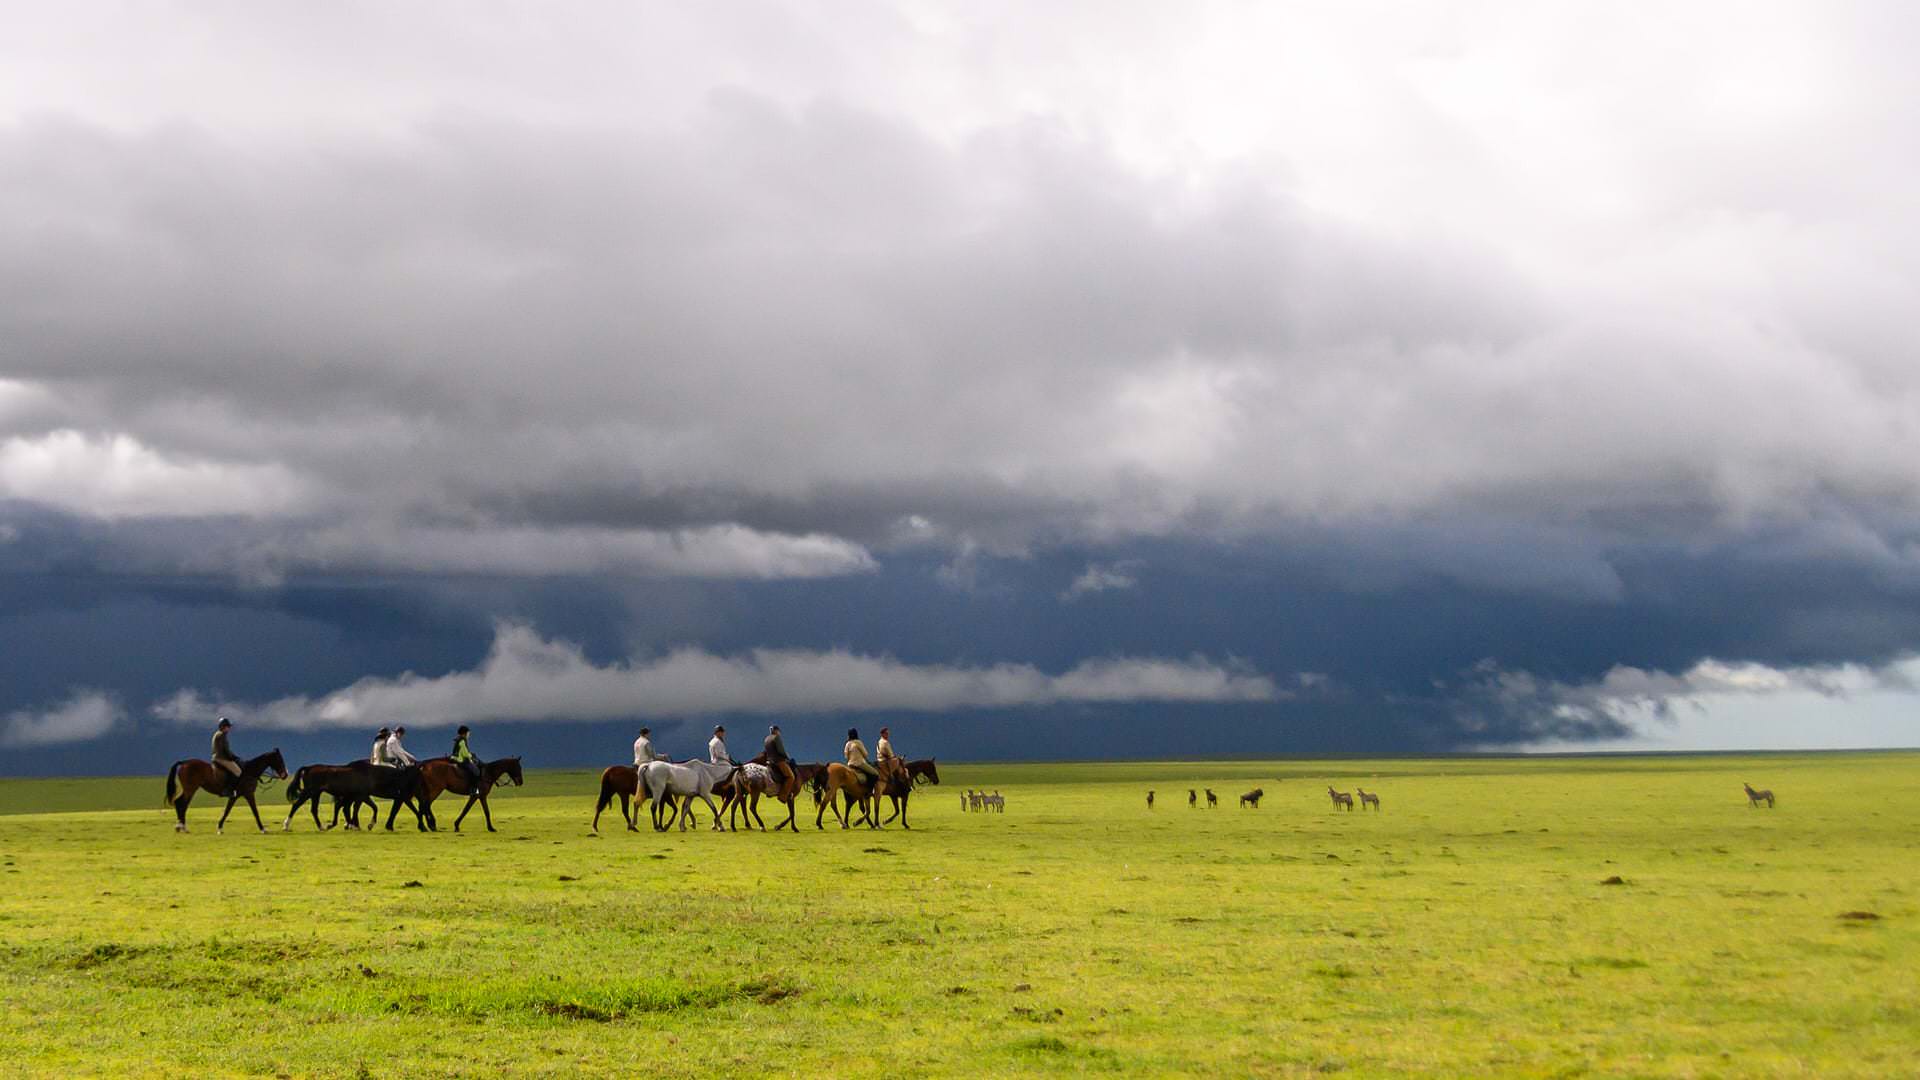 Rain Clouds with horse riders on the Serengeti